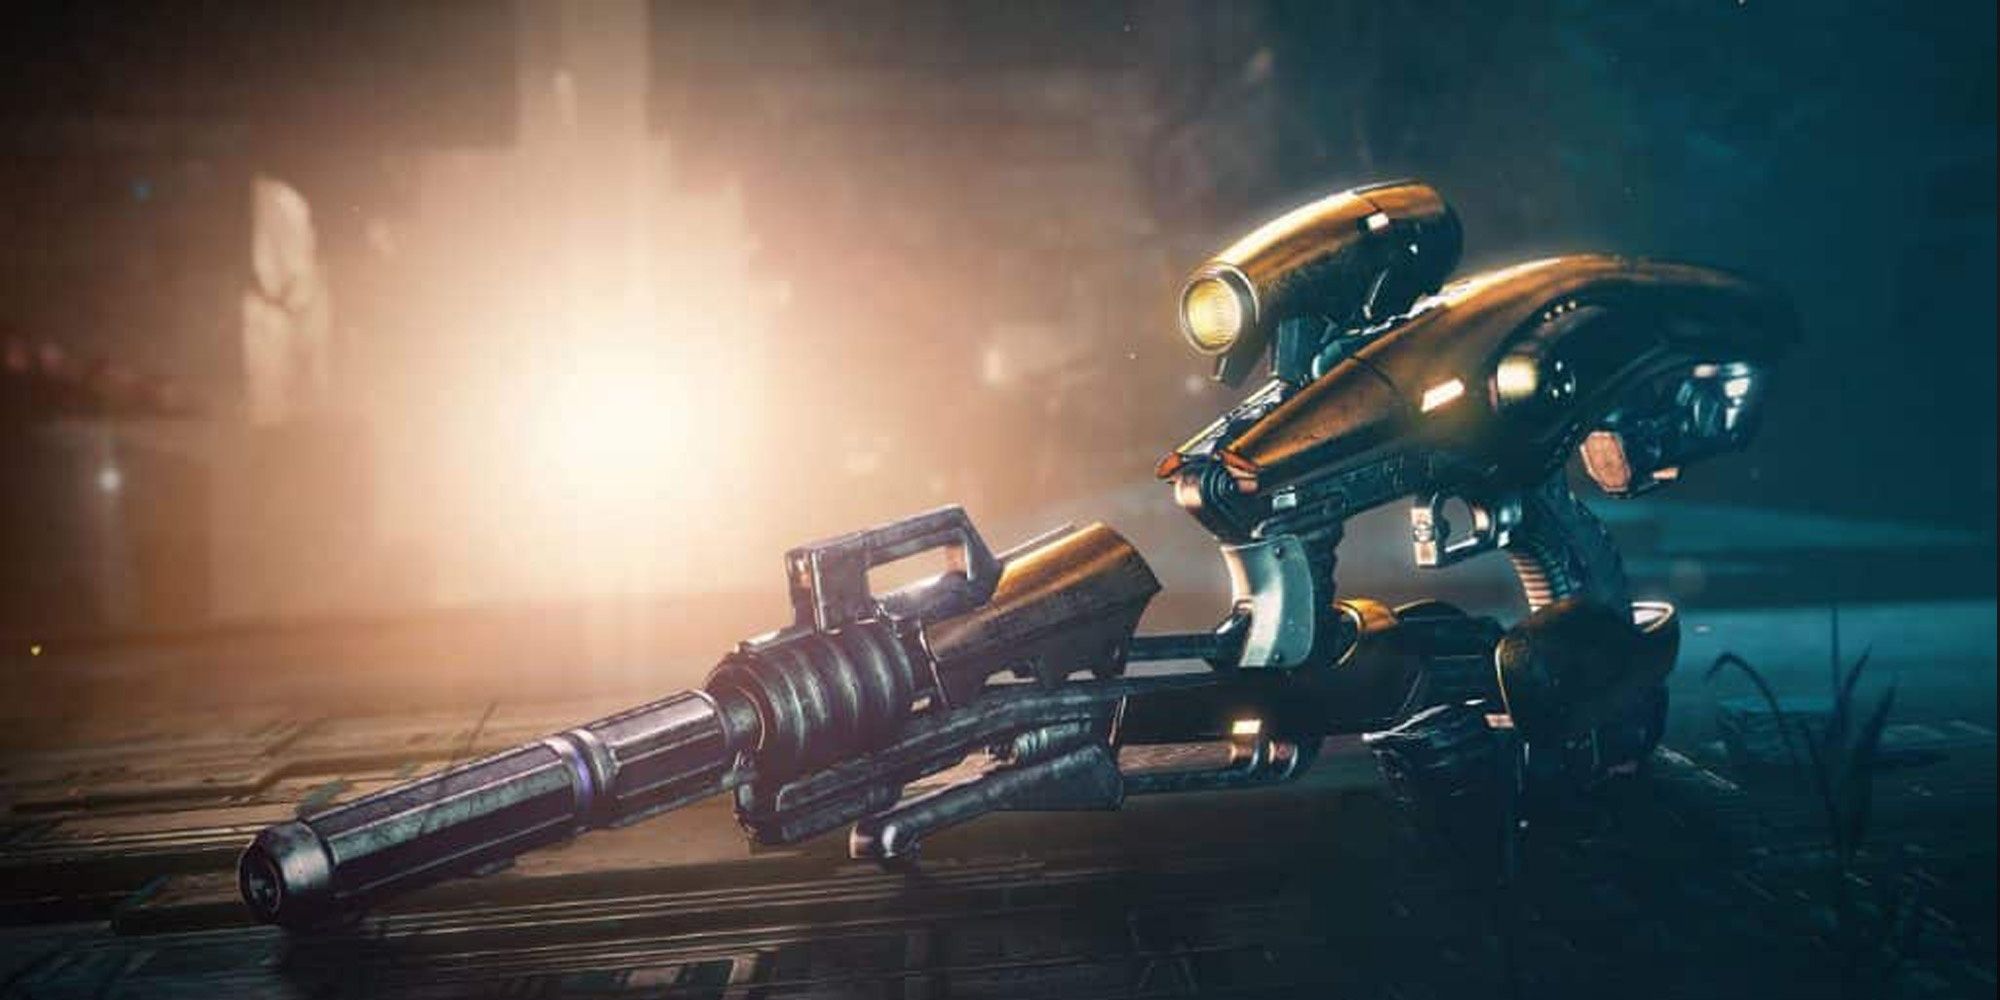 Destiny 2 robotic character armed with gun looks at off-screen target